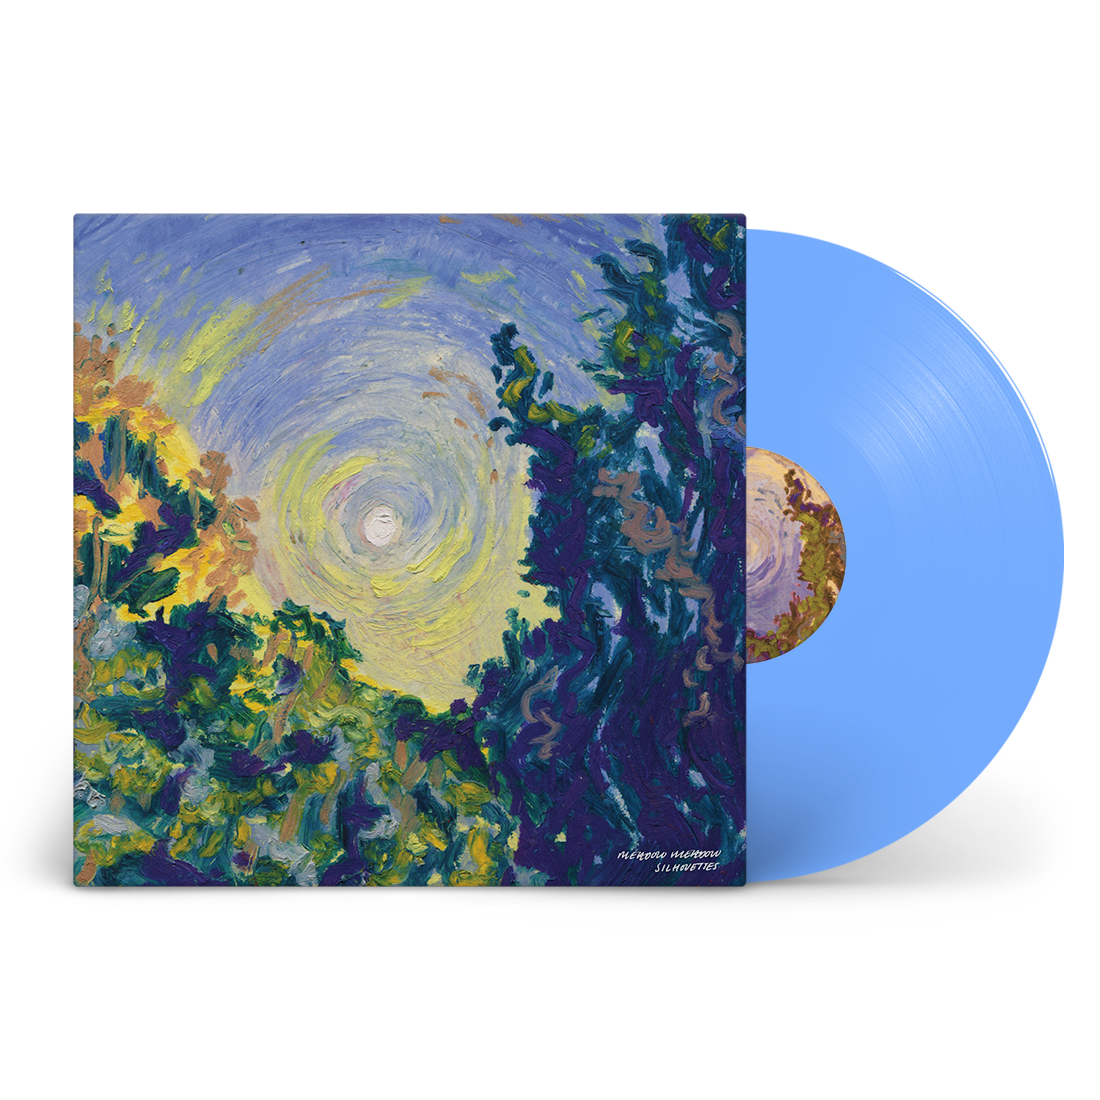 Meadow Meadow - Silhouettes: Signed Exclusive Blue Vinyl LP